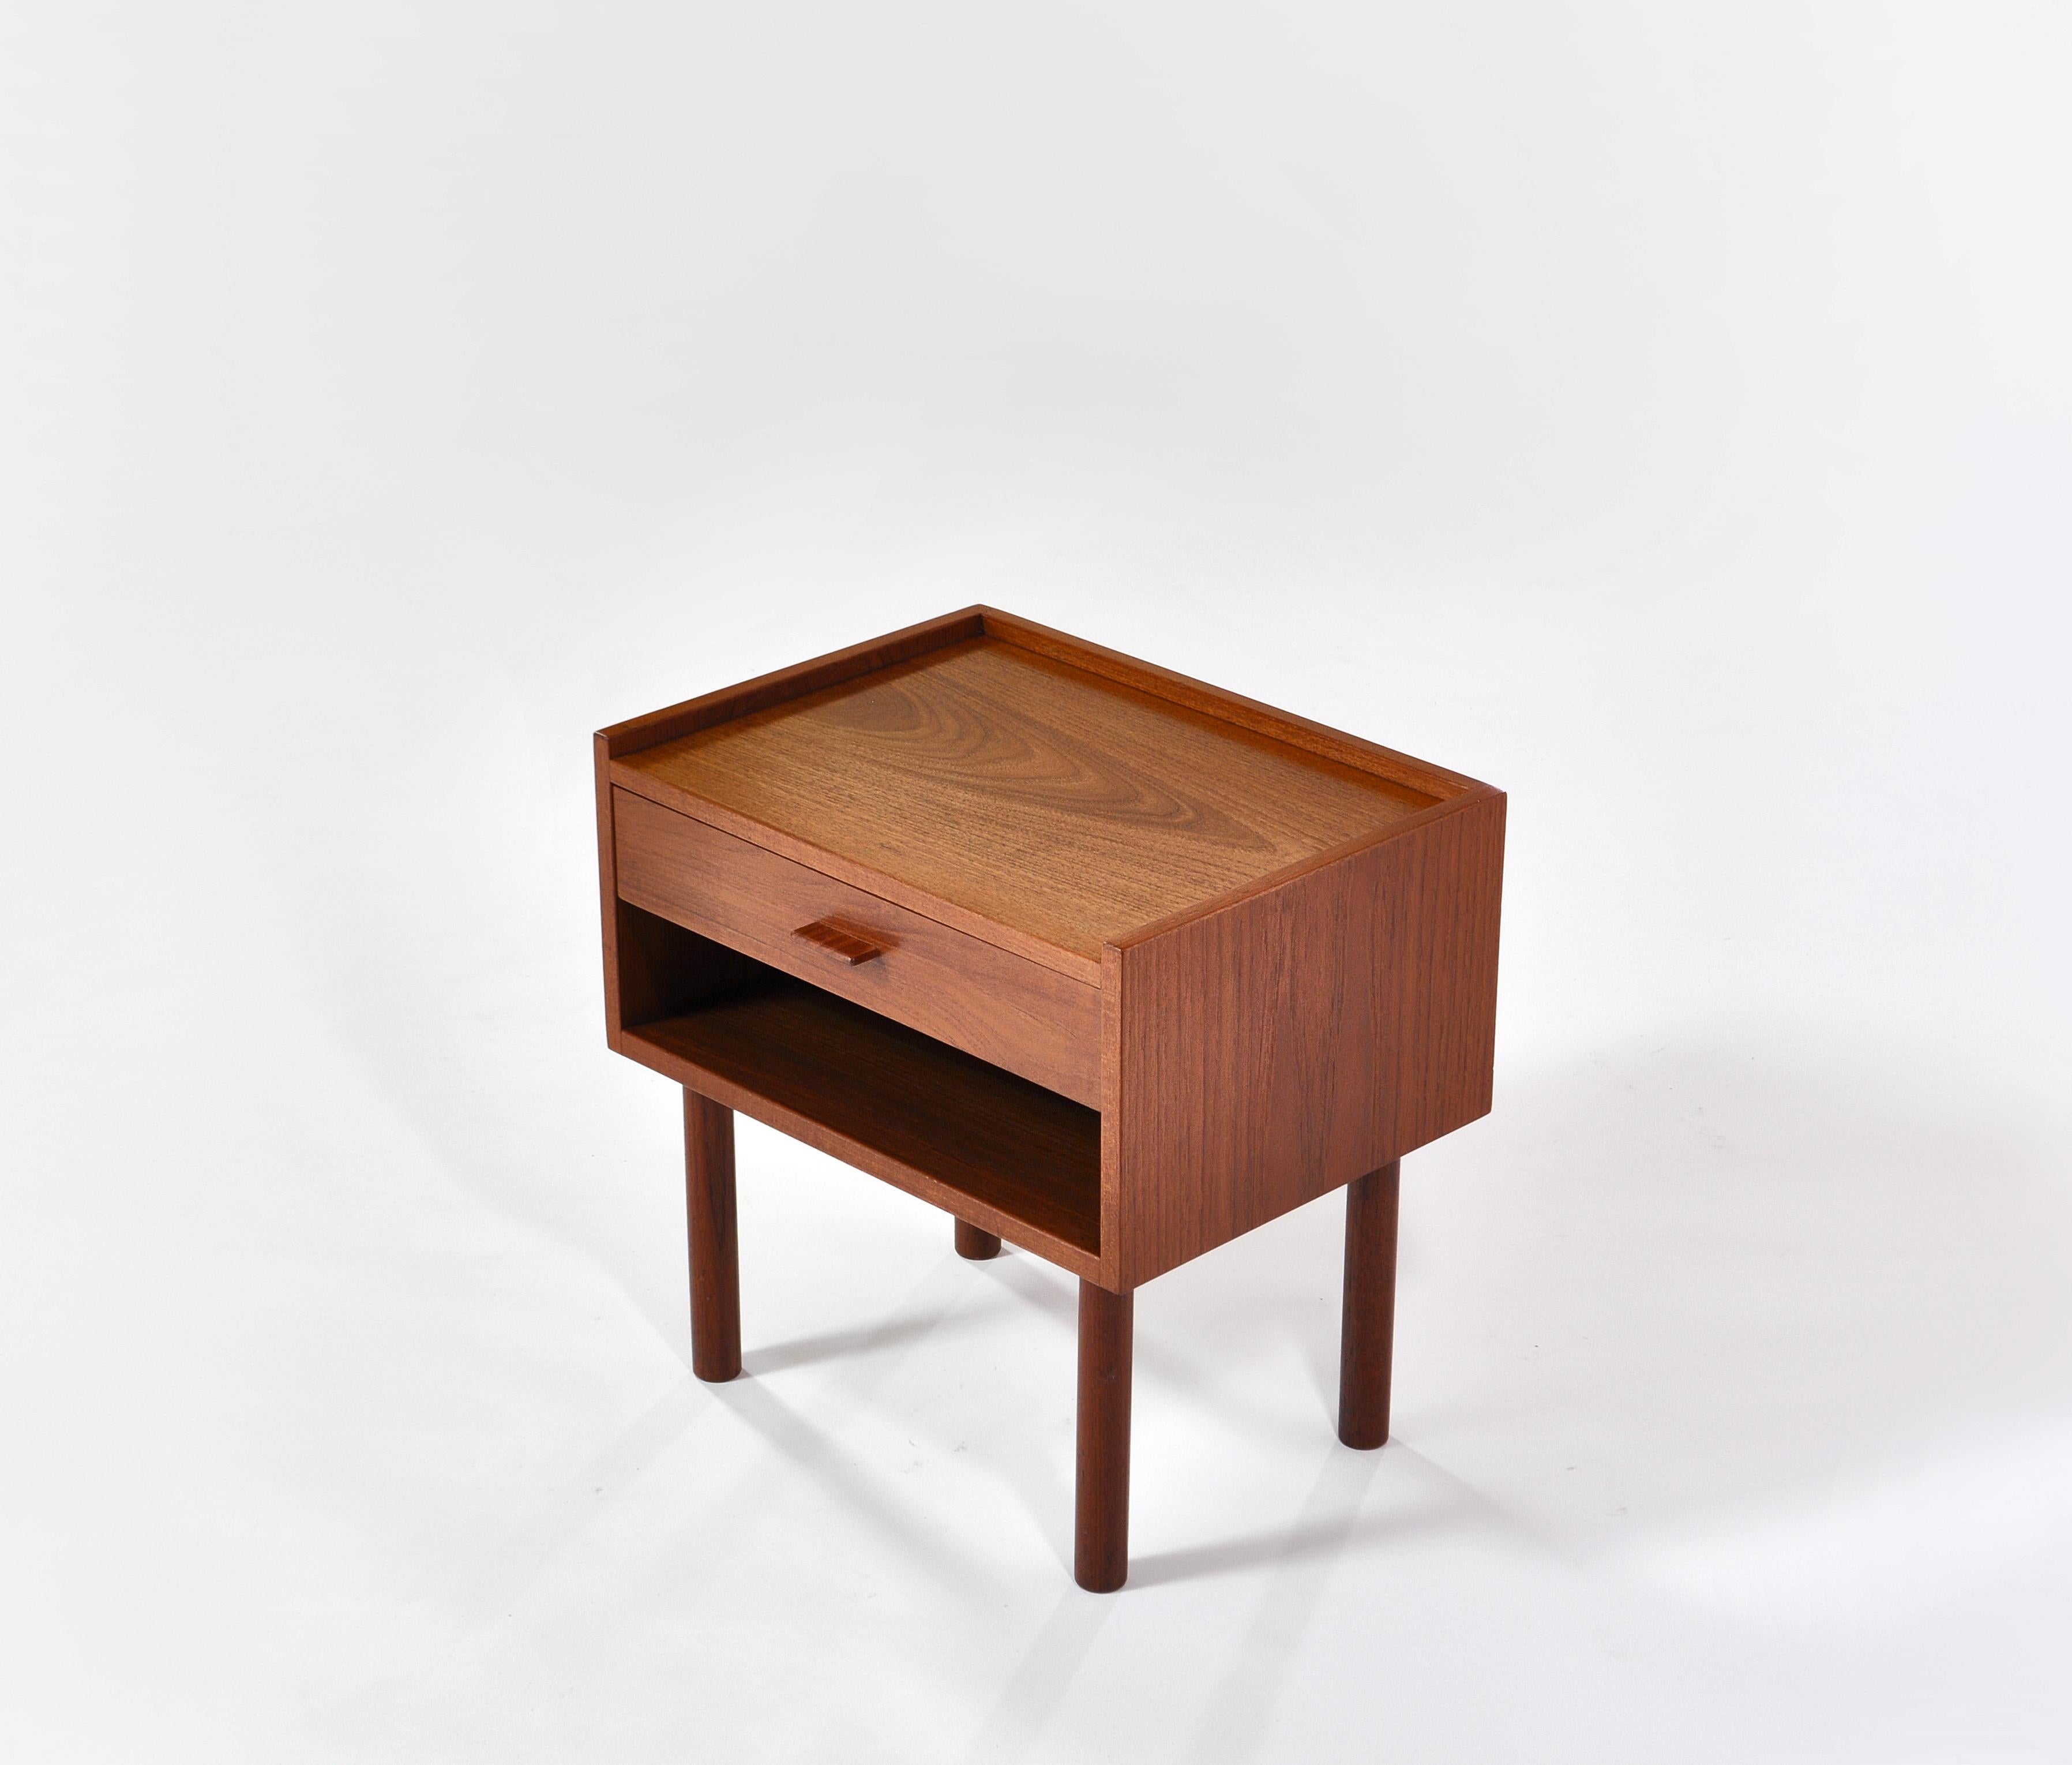 A pair of Danish modern bedside tables from the 1960s by Hans J. Wegner. Typical of Wegner's designs from this period is the minimalistic approach to design and the subtle details. Each table features solid conical teak legs and a drawer with a